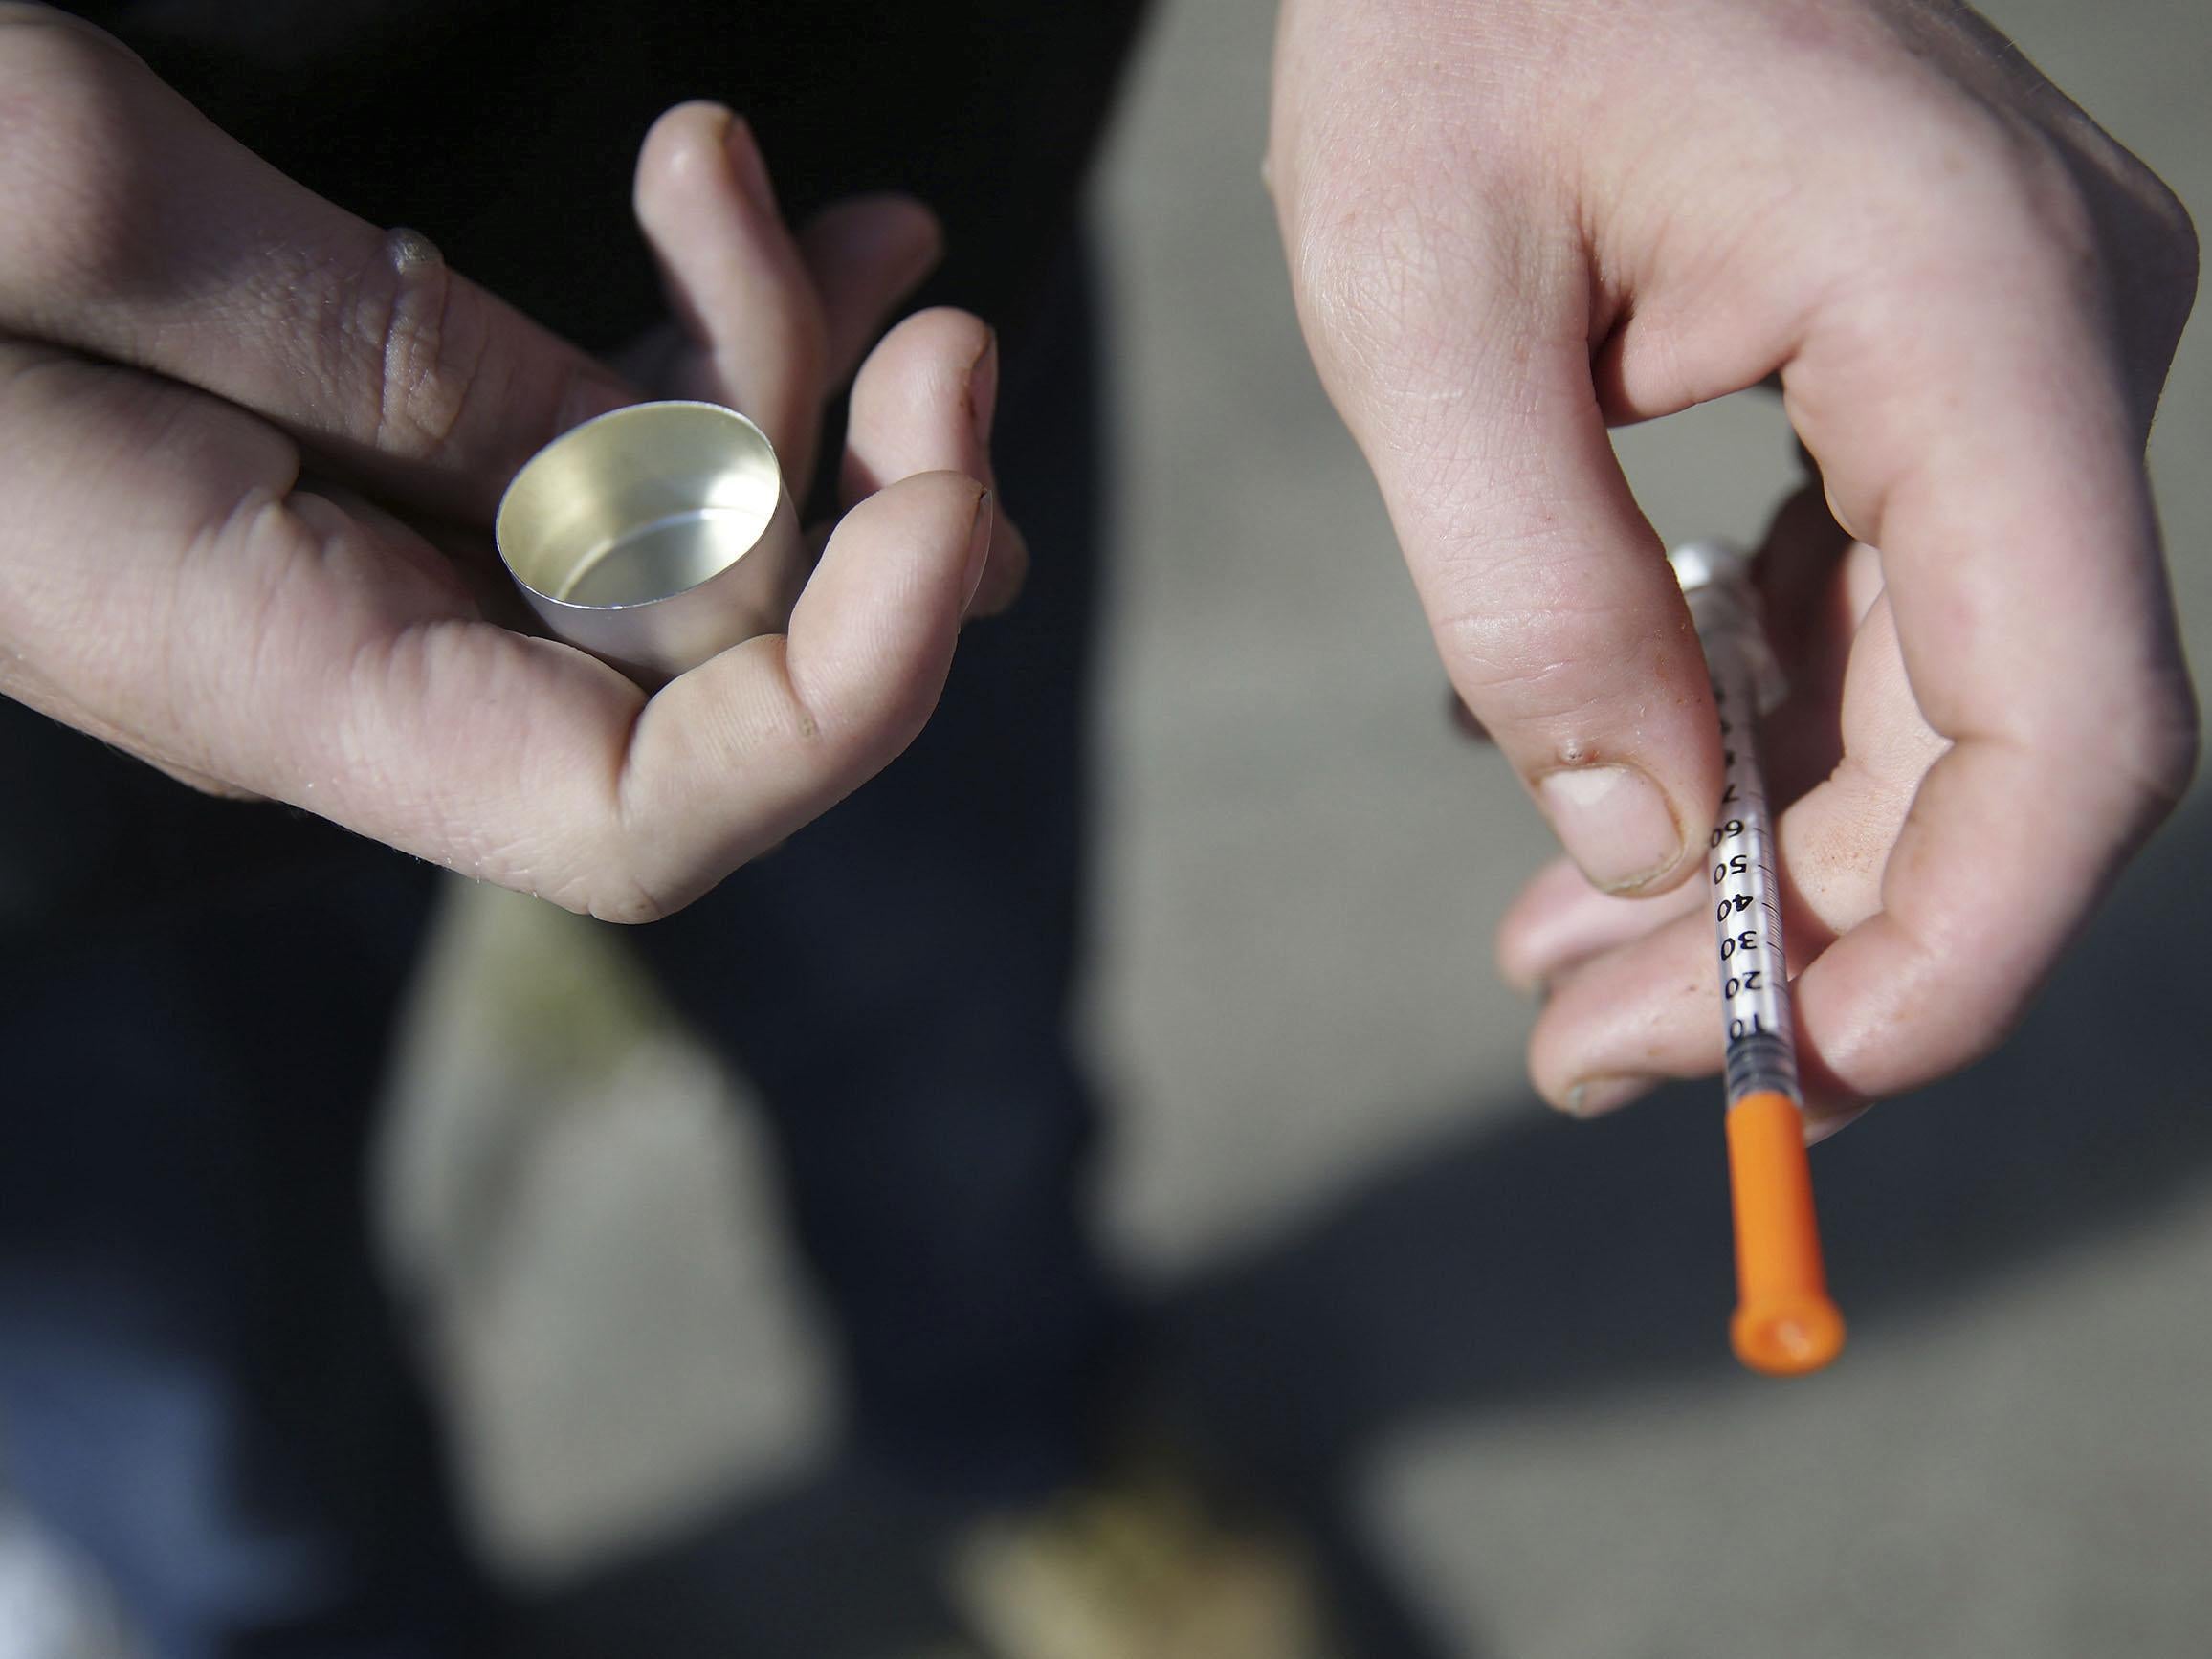 Just two to three milligrams of fentanyl can lead to an overdose